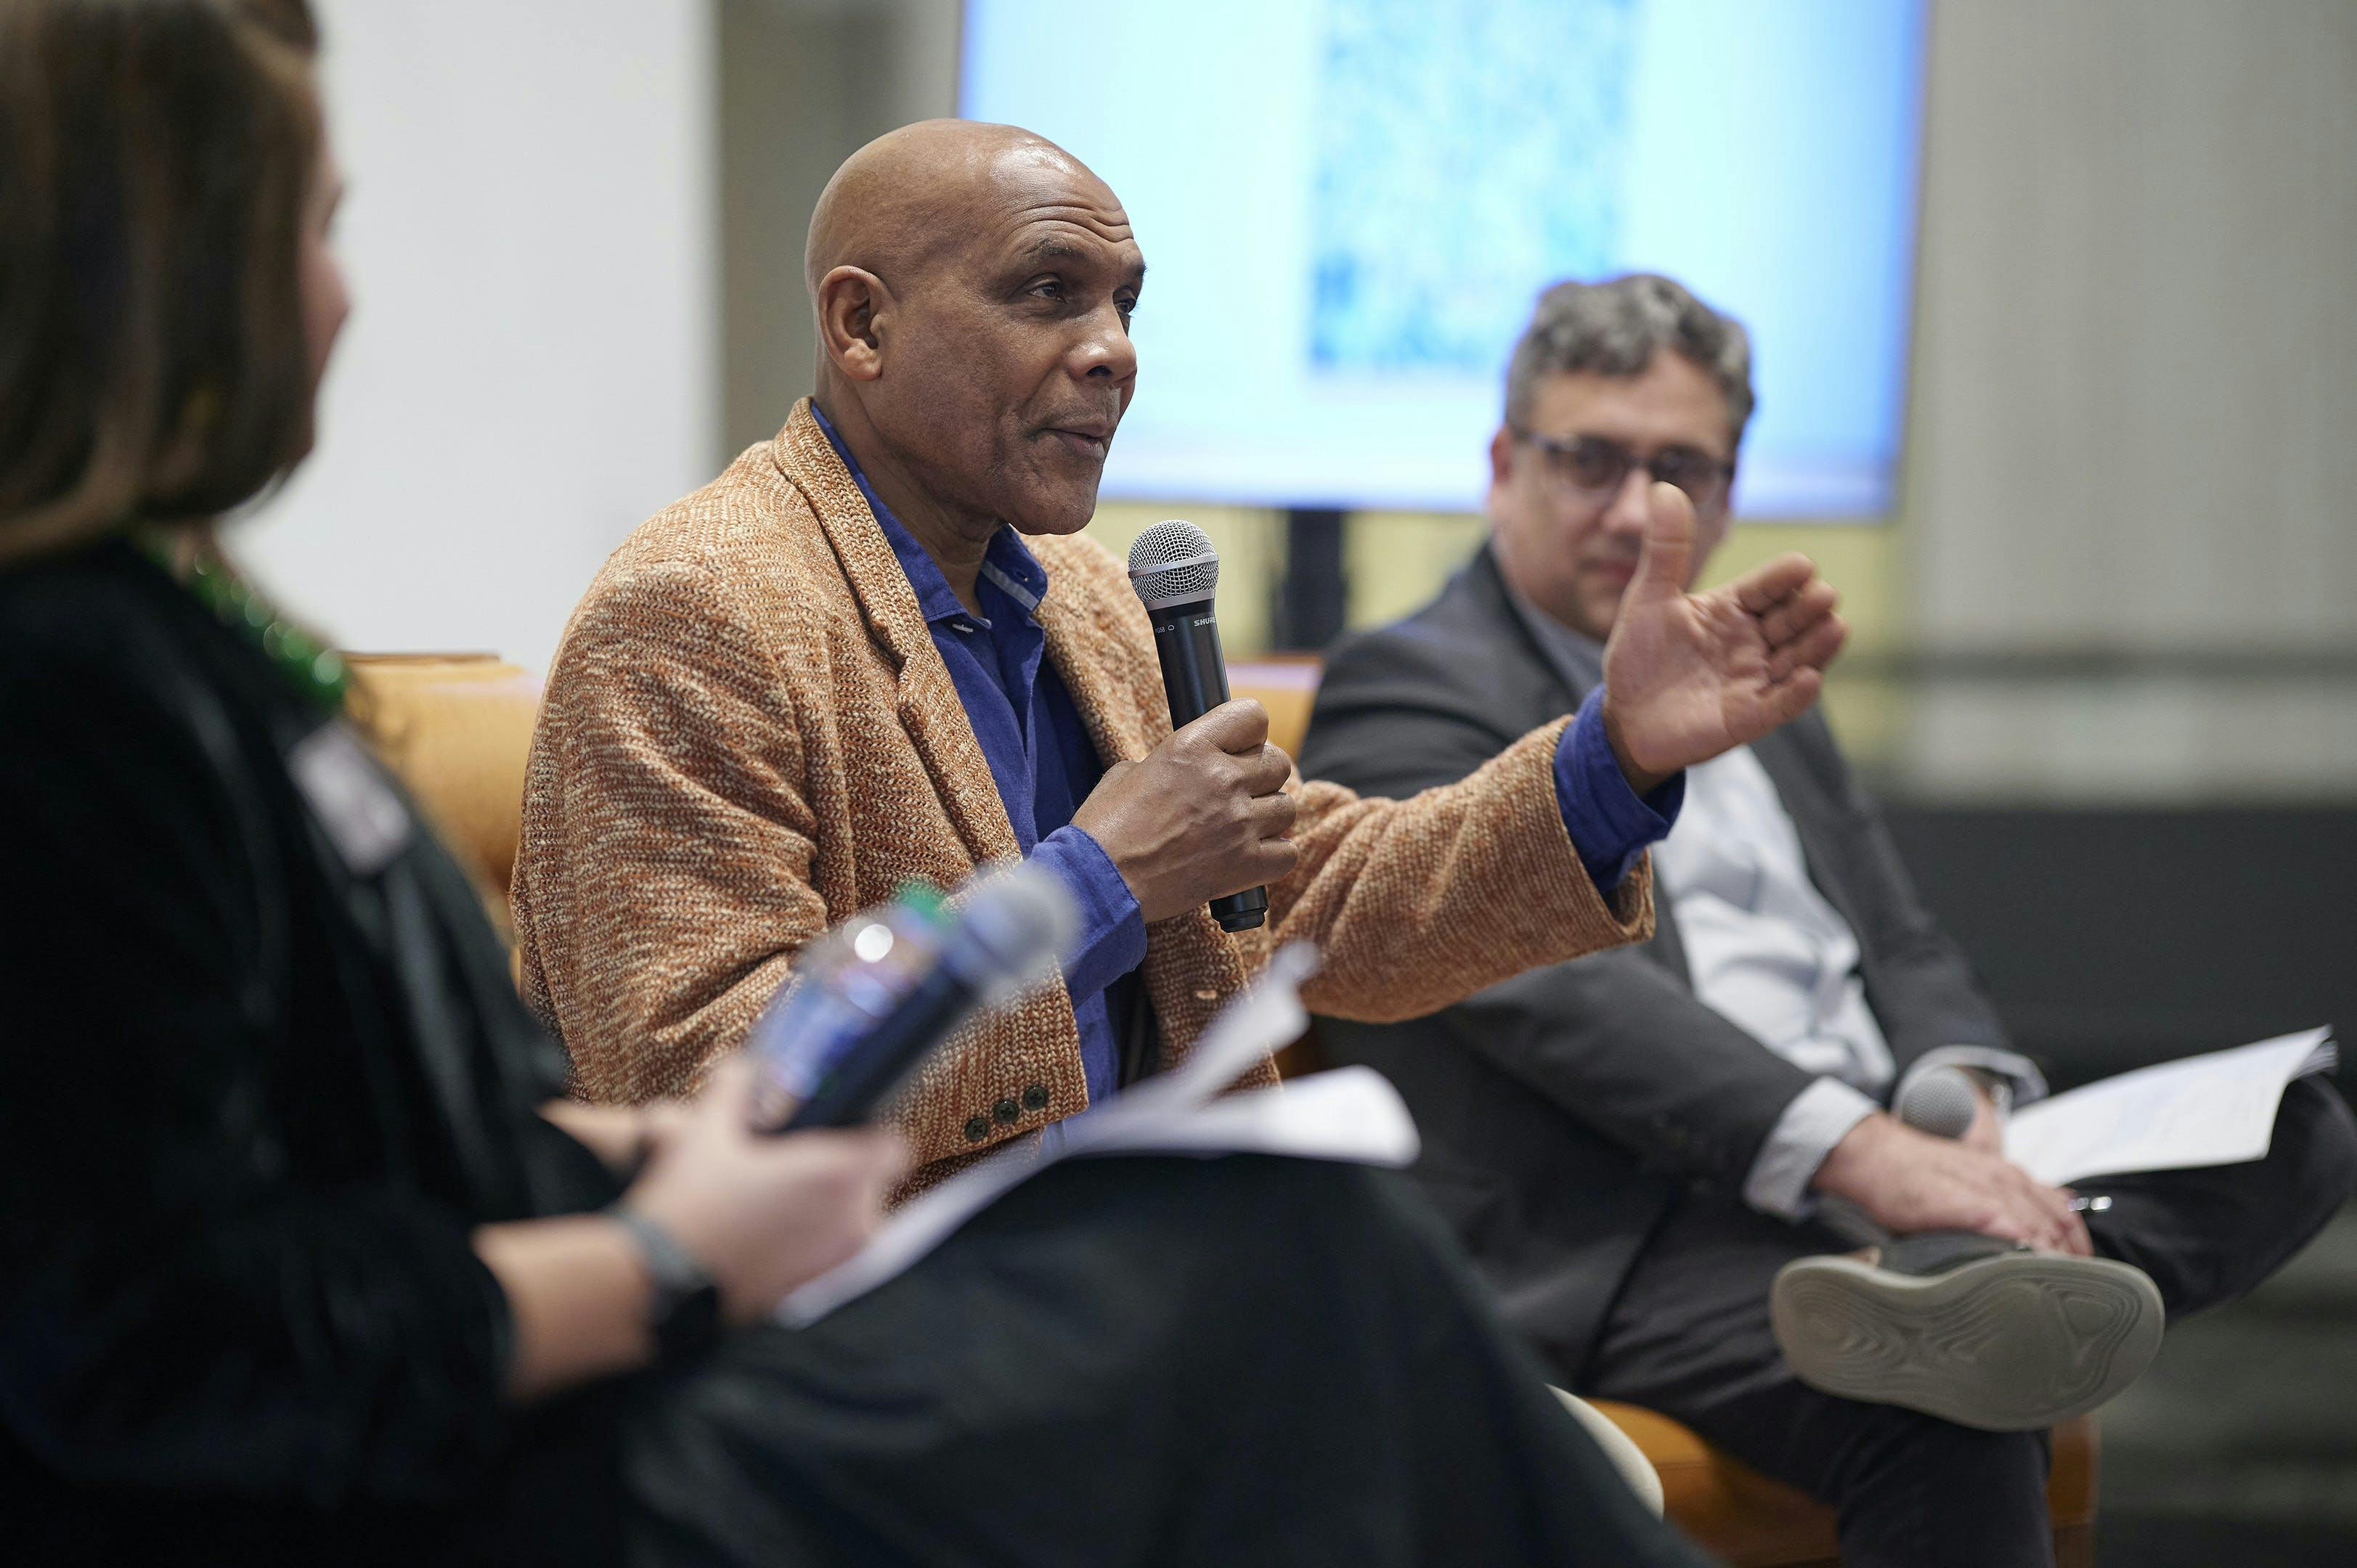 Photo of Denzil Forrester speaking in a panel discussion at Kemper Museum